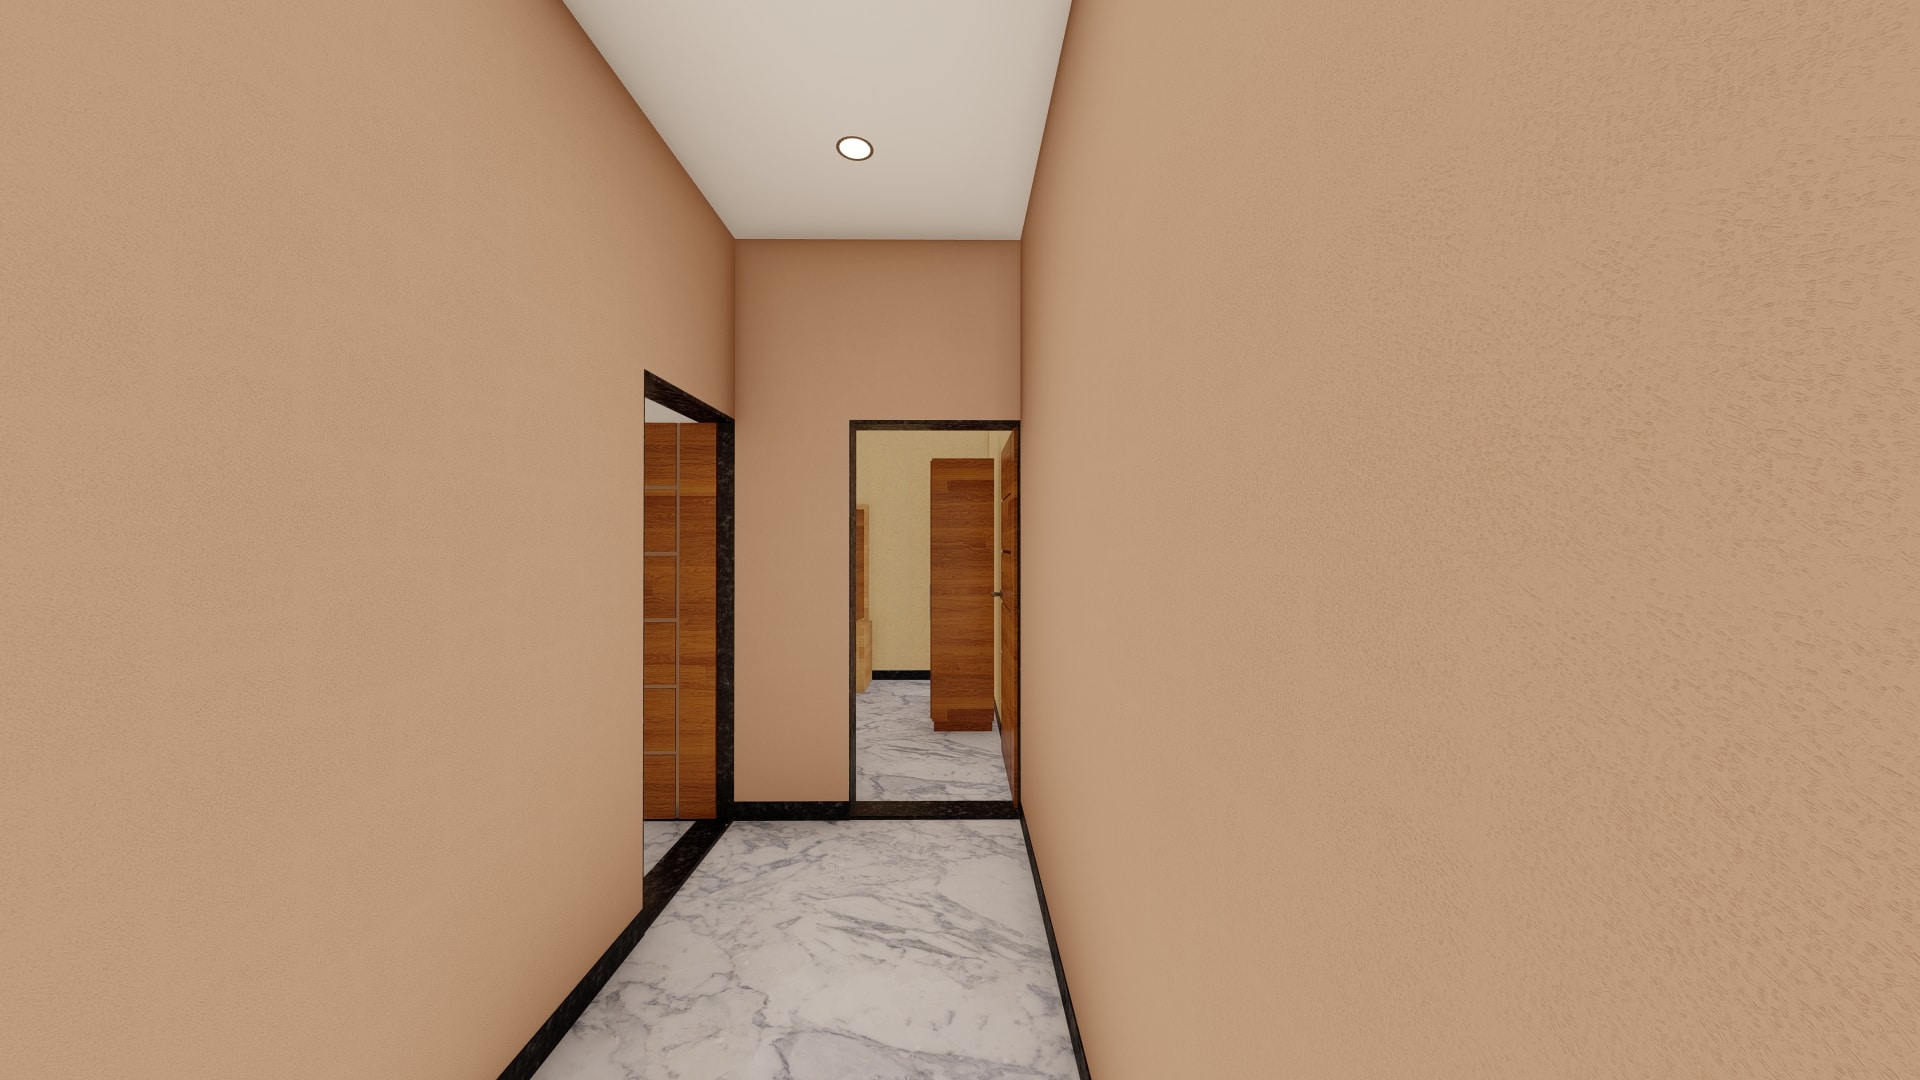 home office outer area new duplex layout design by urban terrace north facing 20x50 sq ft